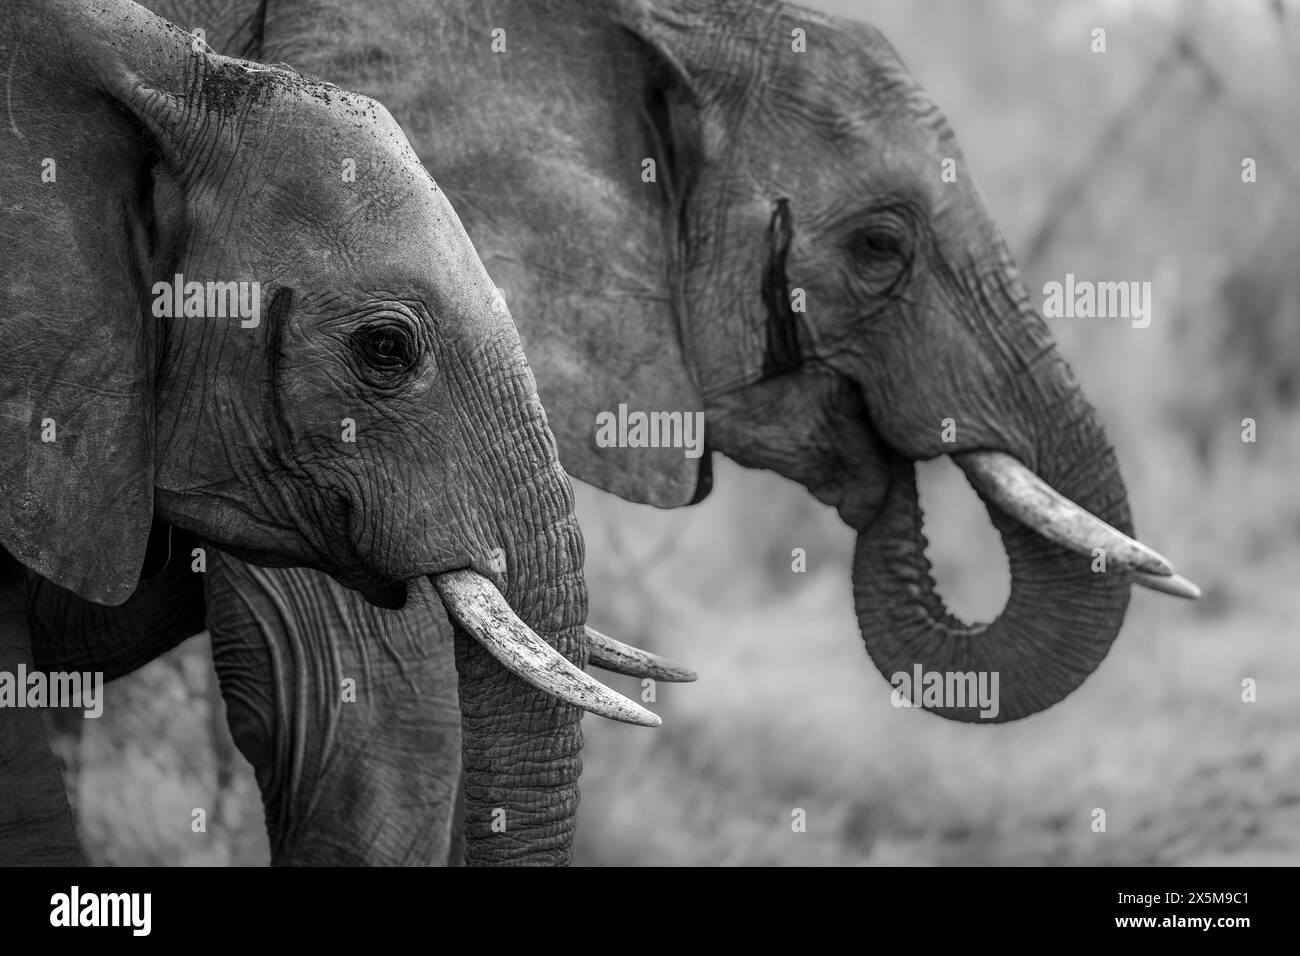 Two elephants, Loxodonta africana, drinking, in black and white. Stock Photo